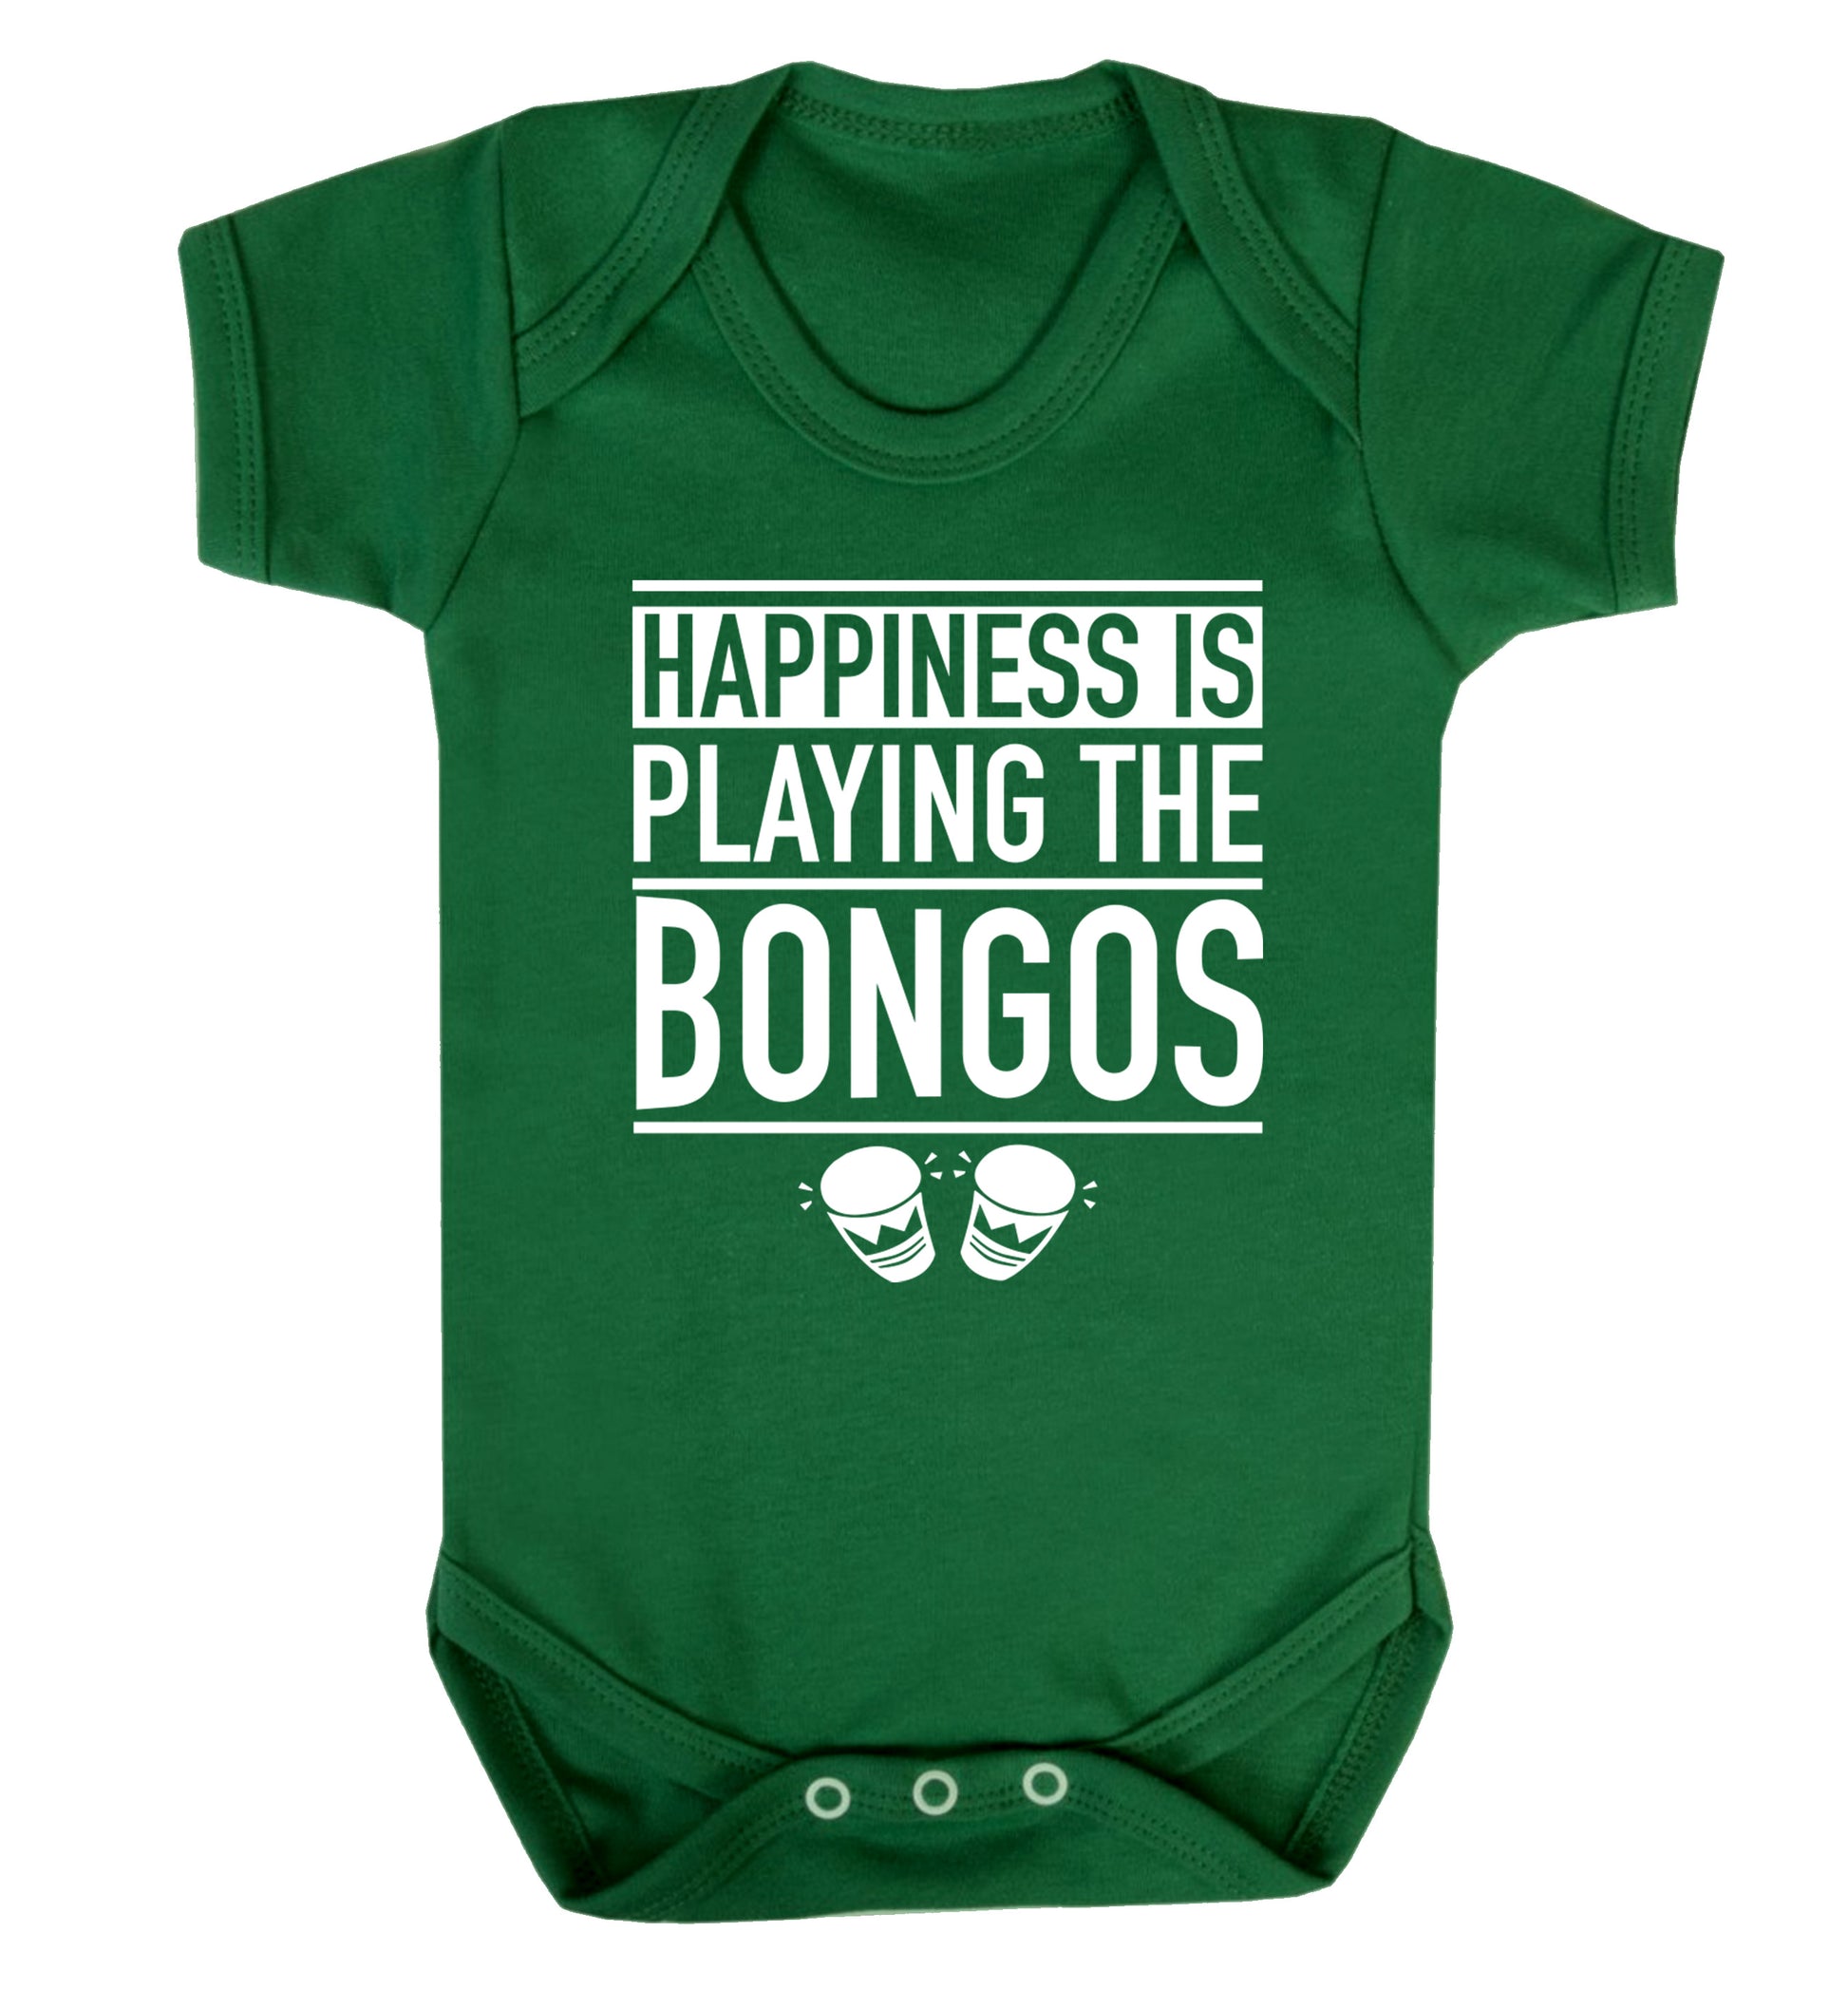 Happiness is playing the bongos Baby Vest green 18-24 months